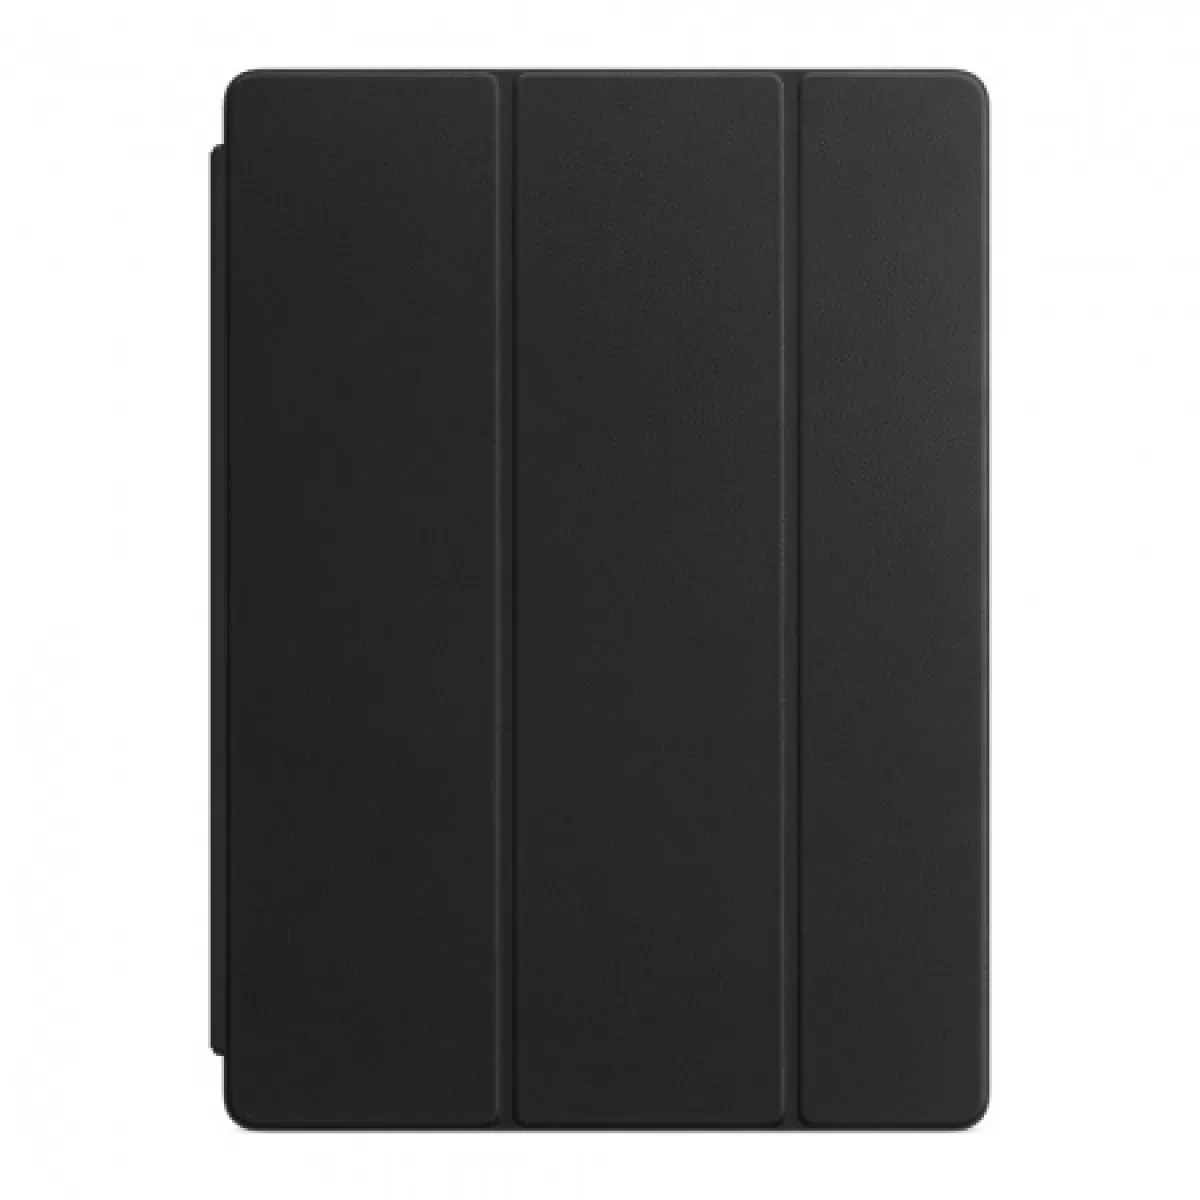 Apple Leather Smart Cover for 12.9inch iPad Pro Black